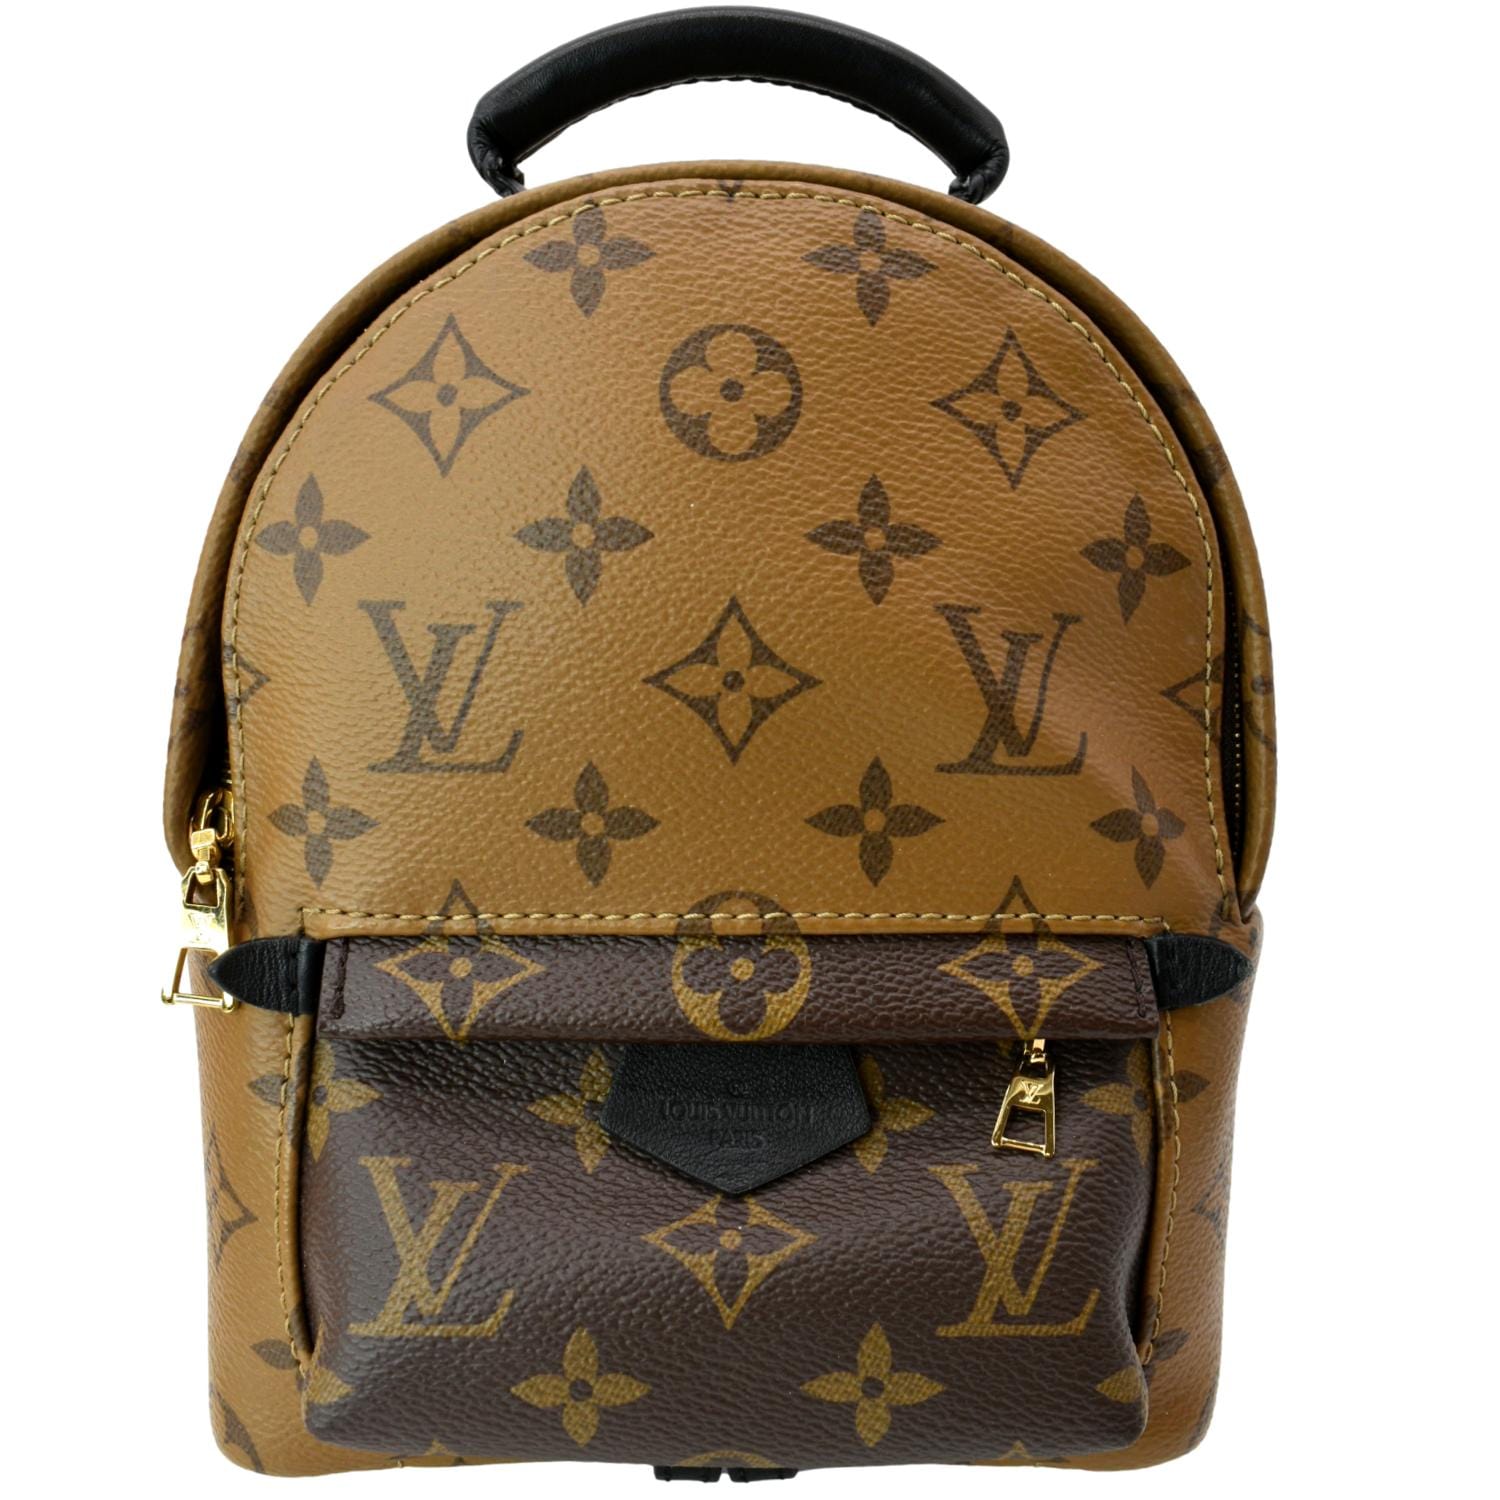 The Louis Vuitton Palm Springs Mini Backpack is the Bag of the